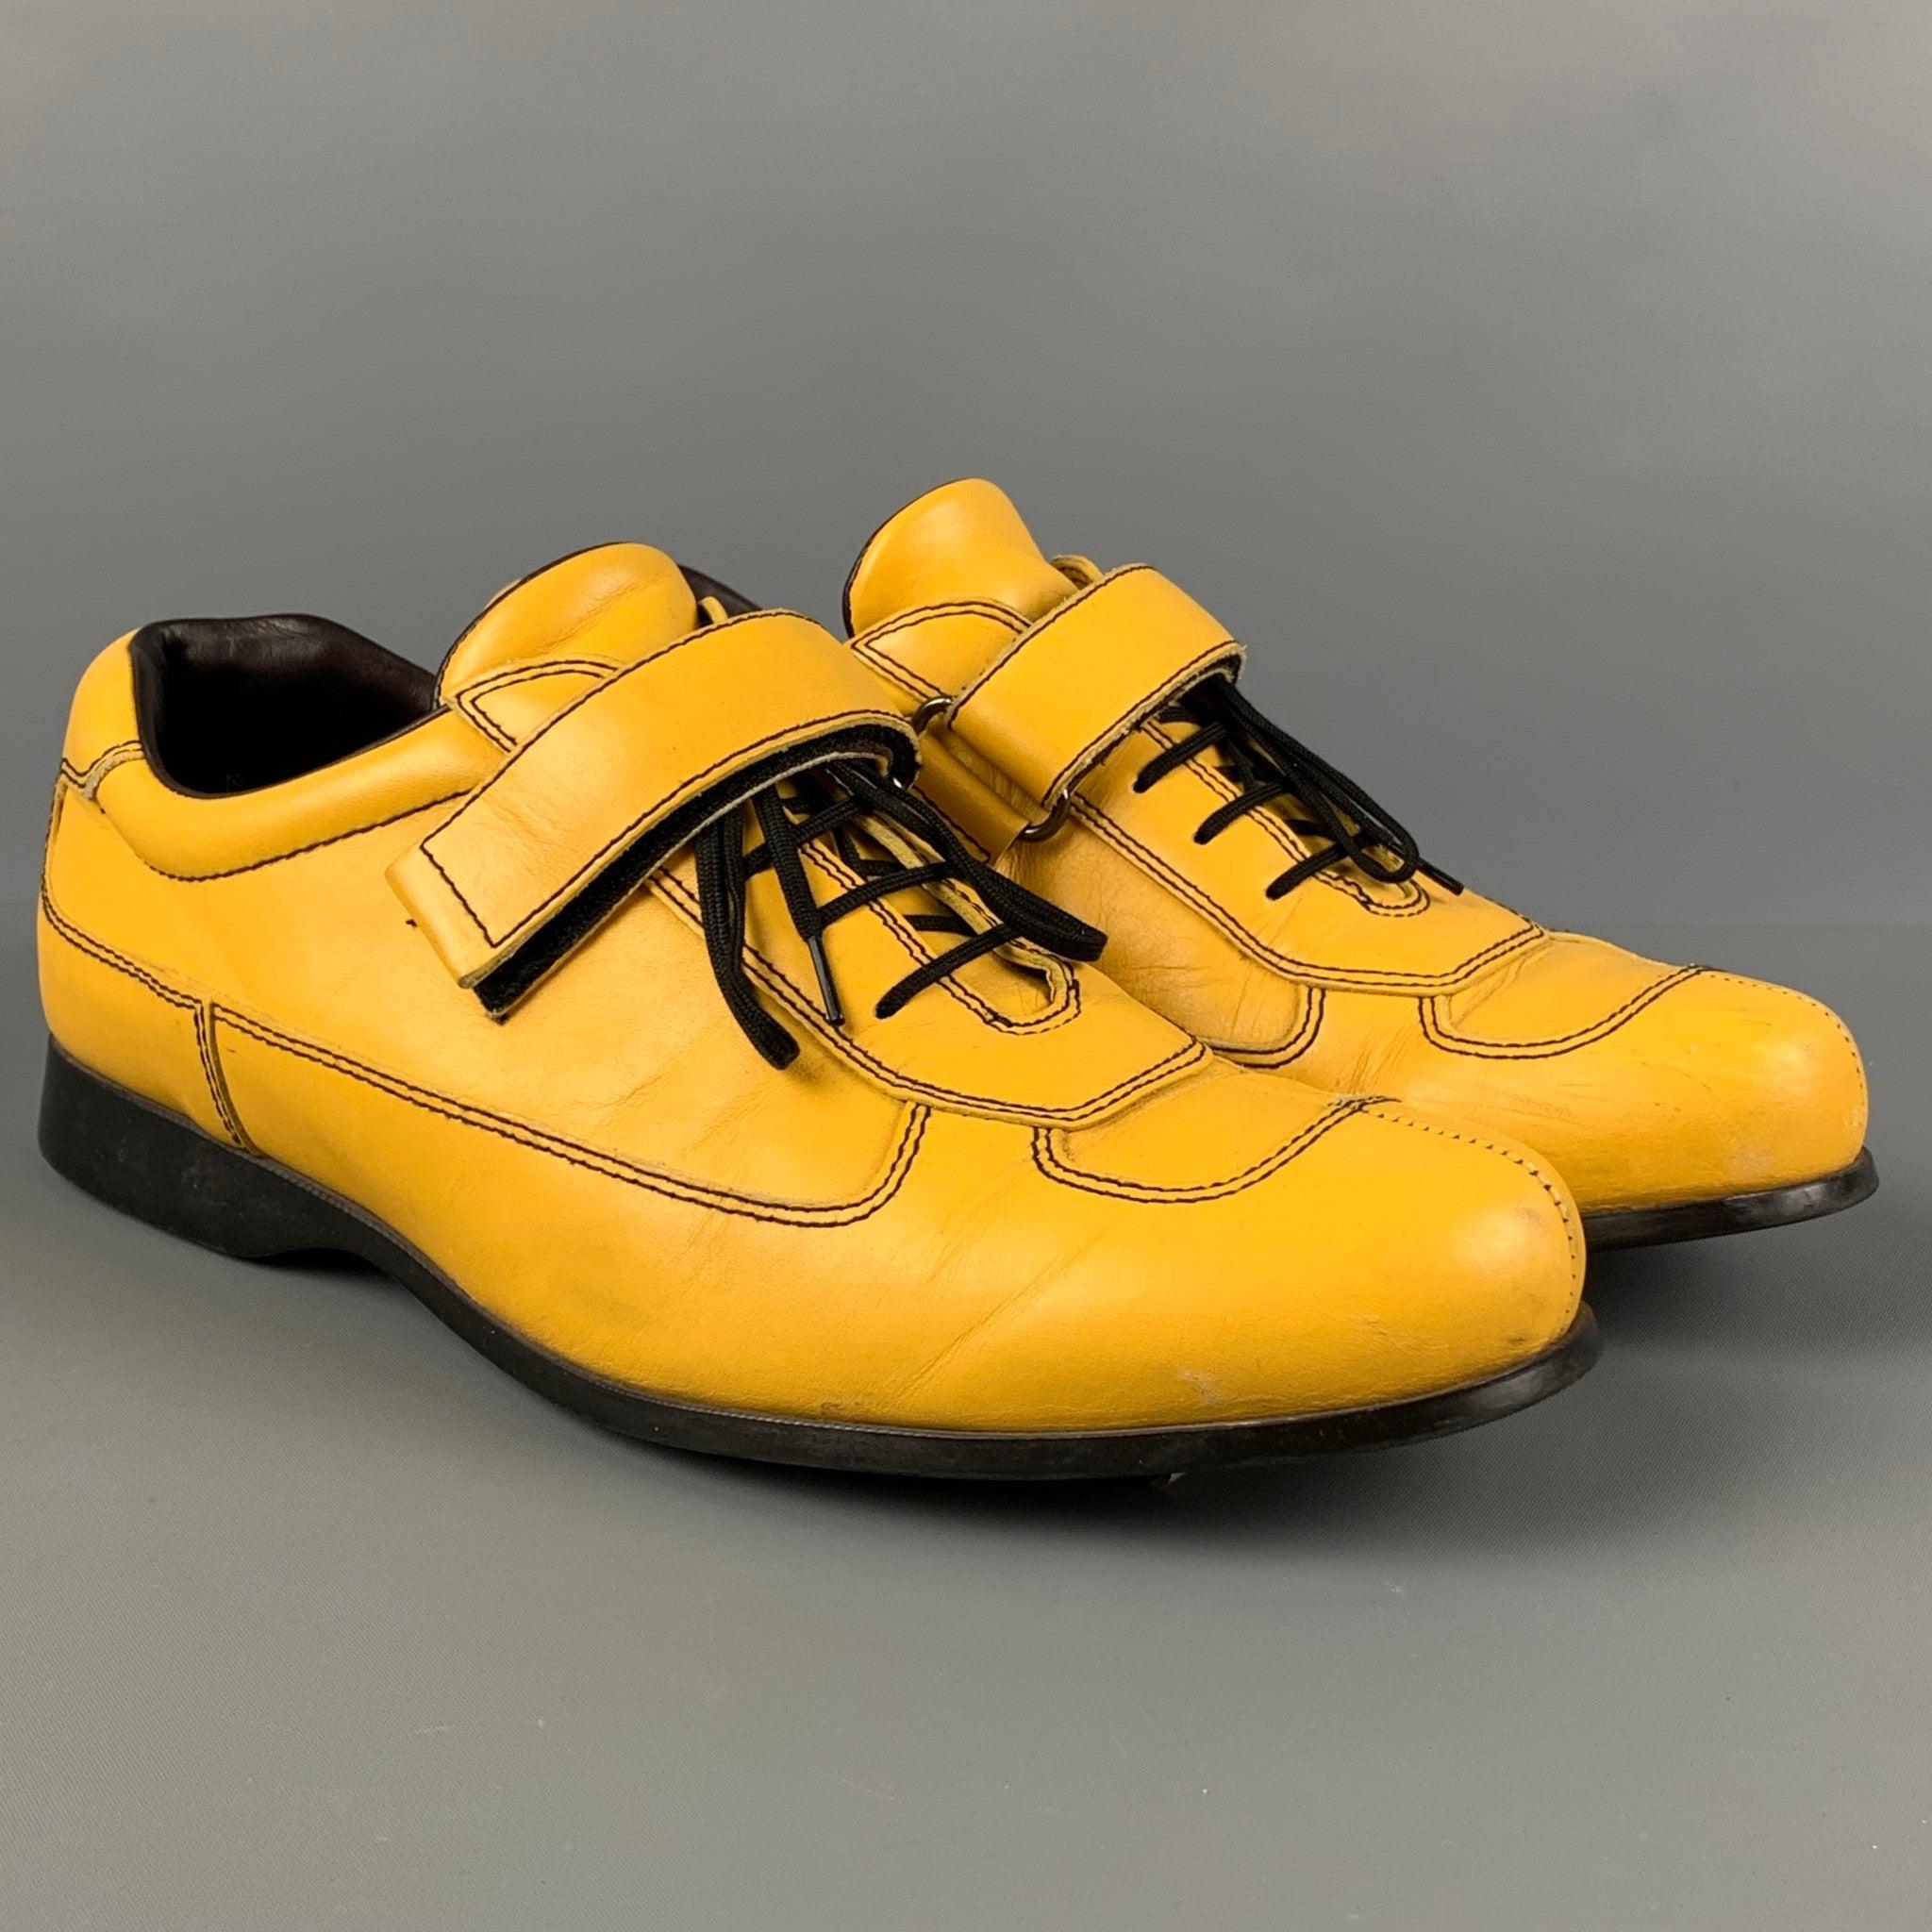 PRADA shoes comes in a yellow leather featuring a split toe, contrast stitching, front strap detail, rubber sole, and a lace up closure. Made in Italy.
 Good
 Pre-Owned Condition. Moderate wear. As-Is.  
 

 Marked:  8 4 E0868 7.5Outsole: 11.5